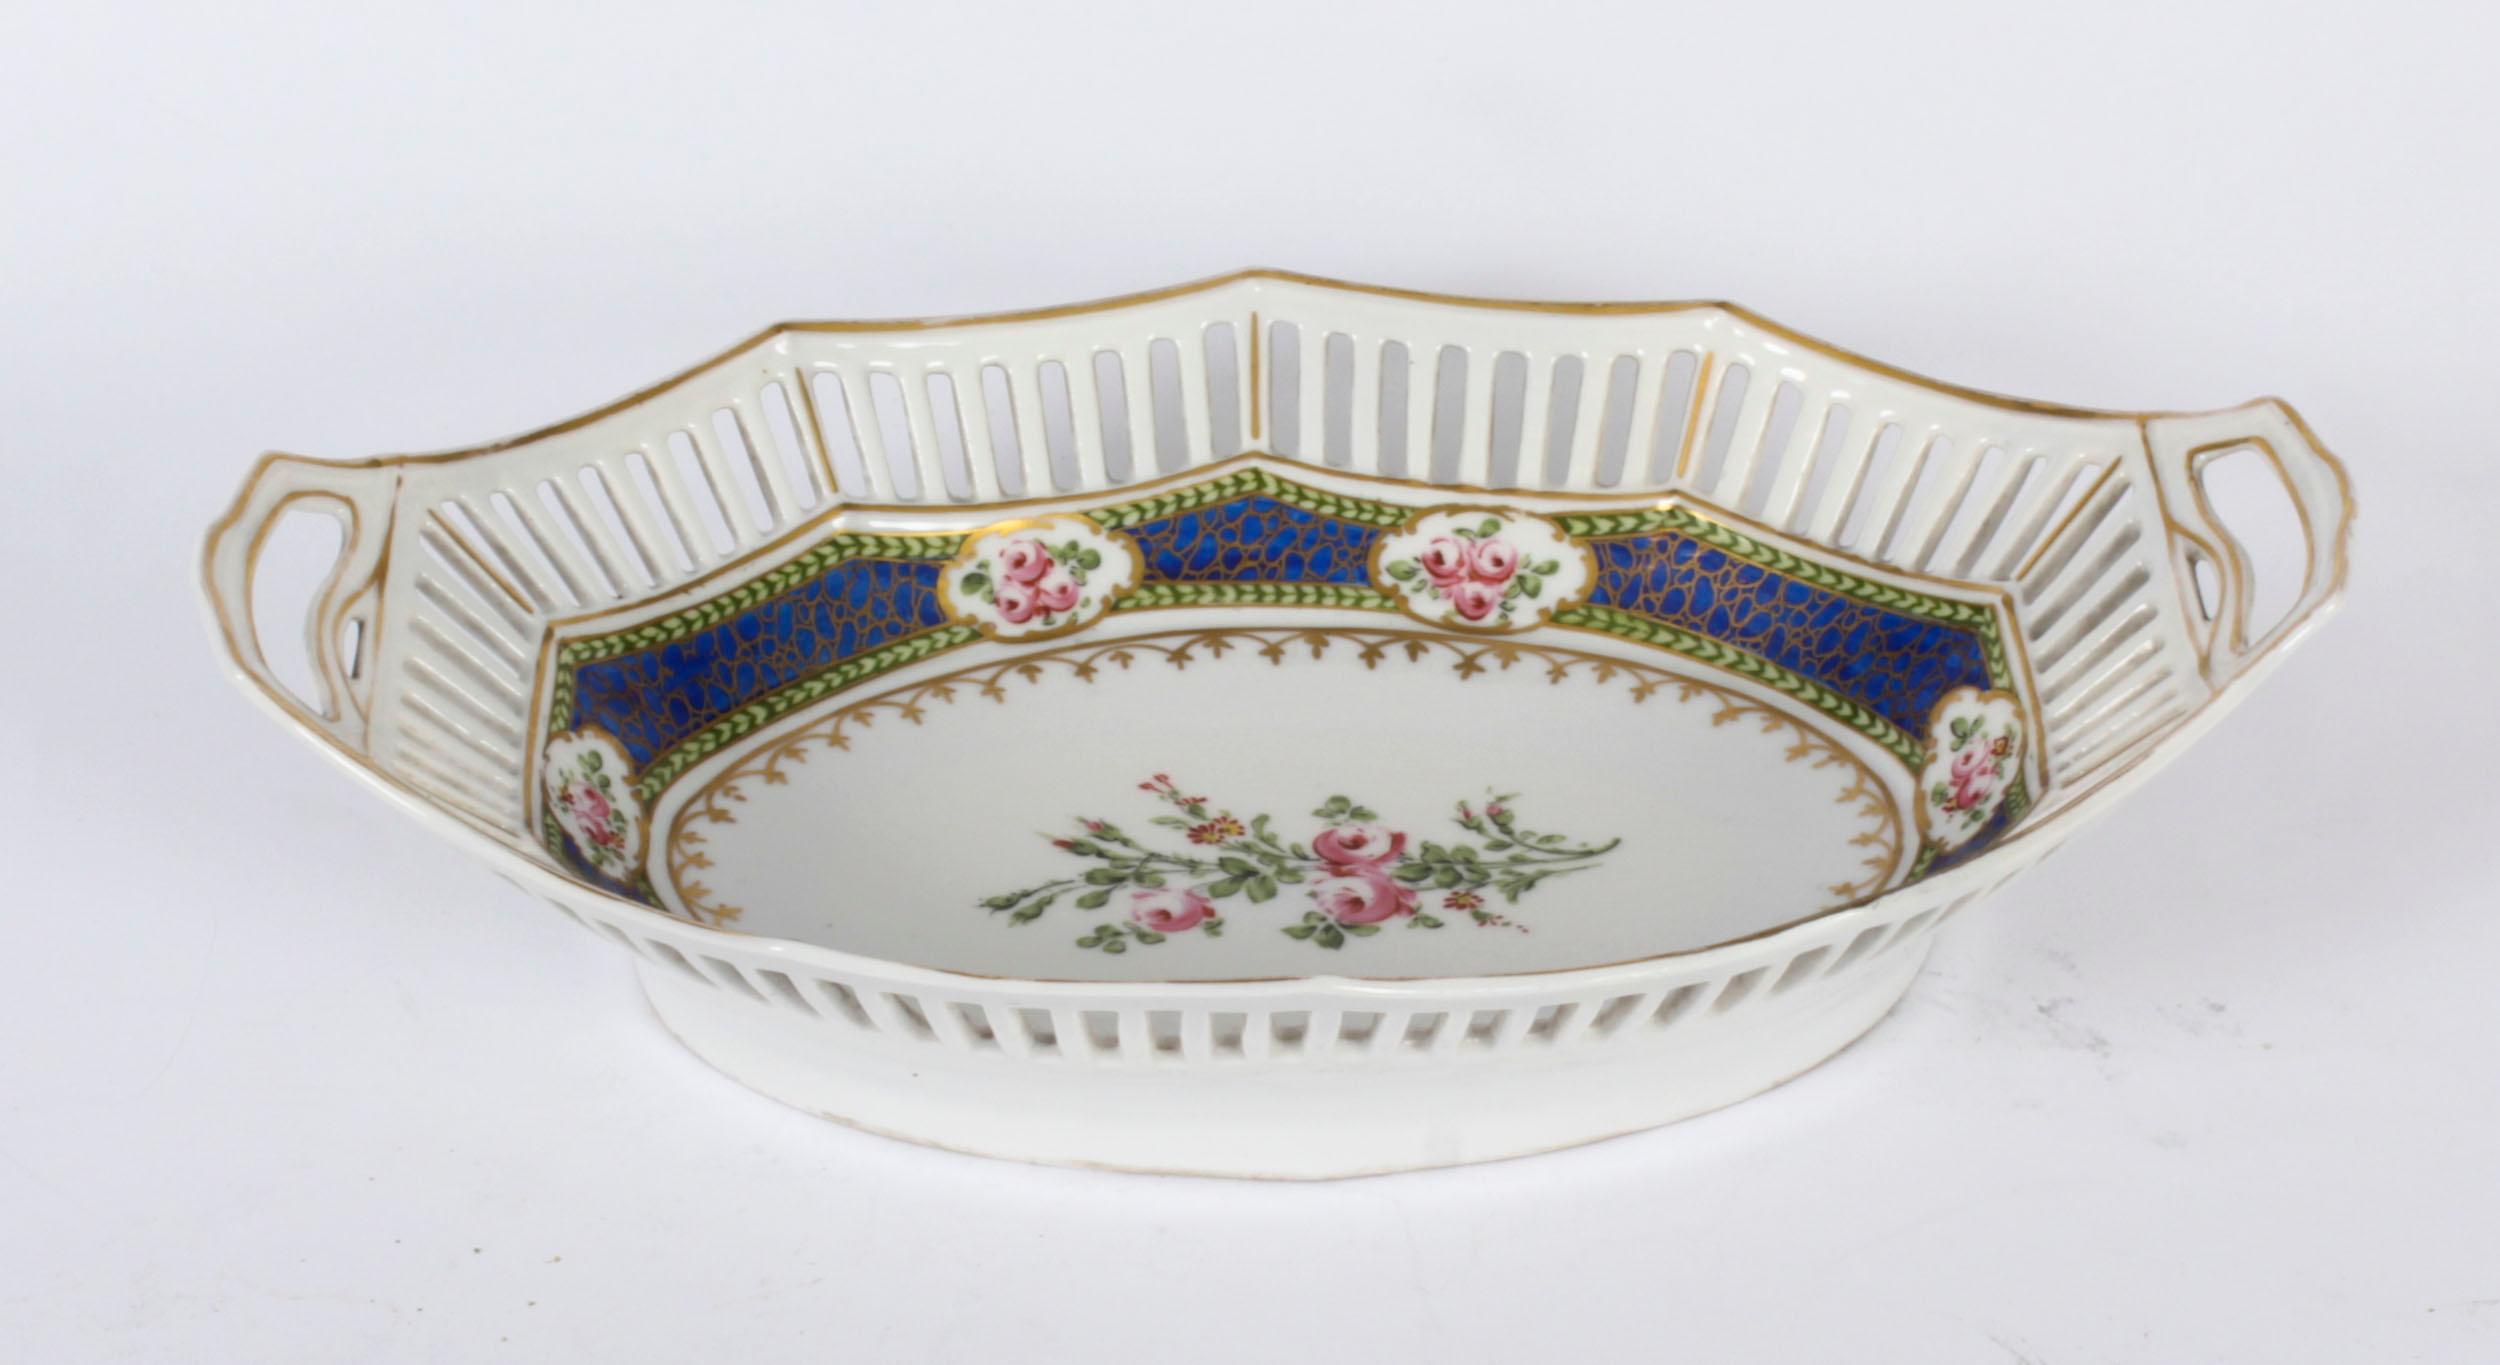 Antique French Sevres Oval Porcelain Dish Late 19th Century For Sale 9